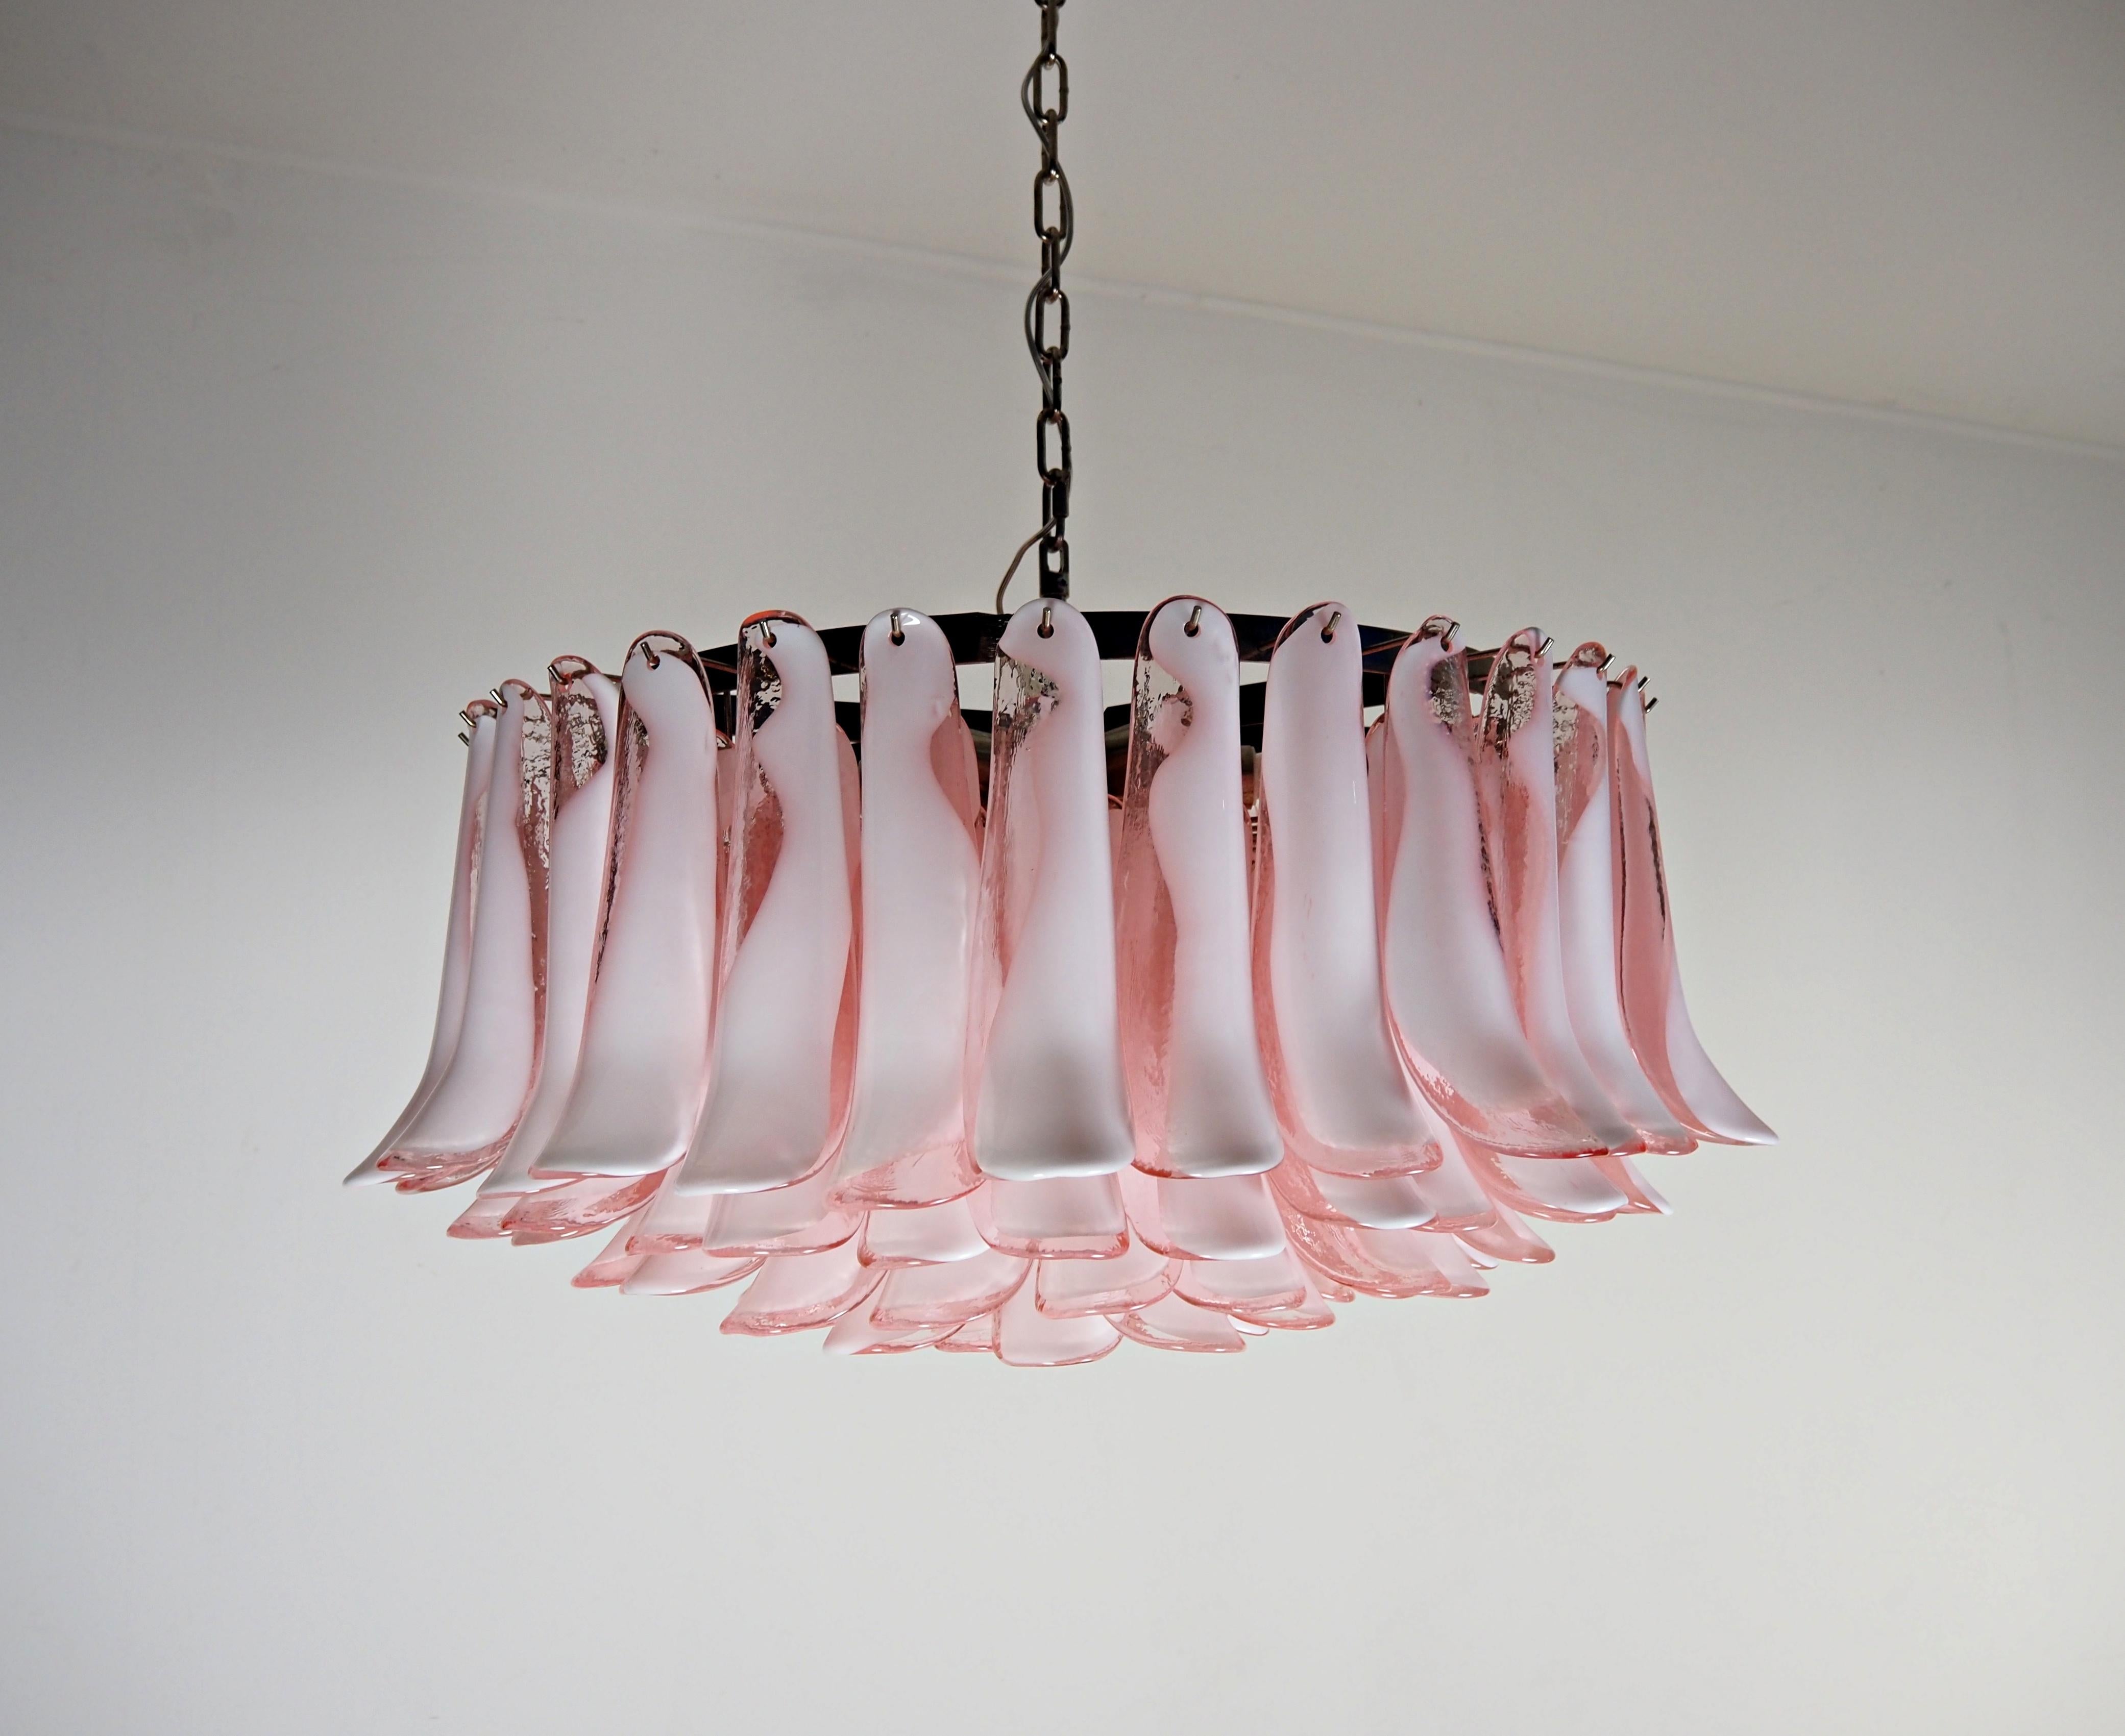 Italian vintage chandelier in Murano glass and nickel plated metal structure. The armor polished nickel supports 101 glass petals (pink and white “lattimo”)  that give a very elegant look. Can be used as a chandelier with chain, or as a ceiling